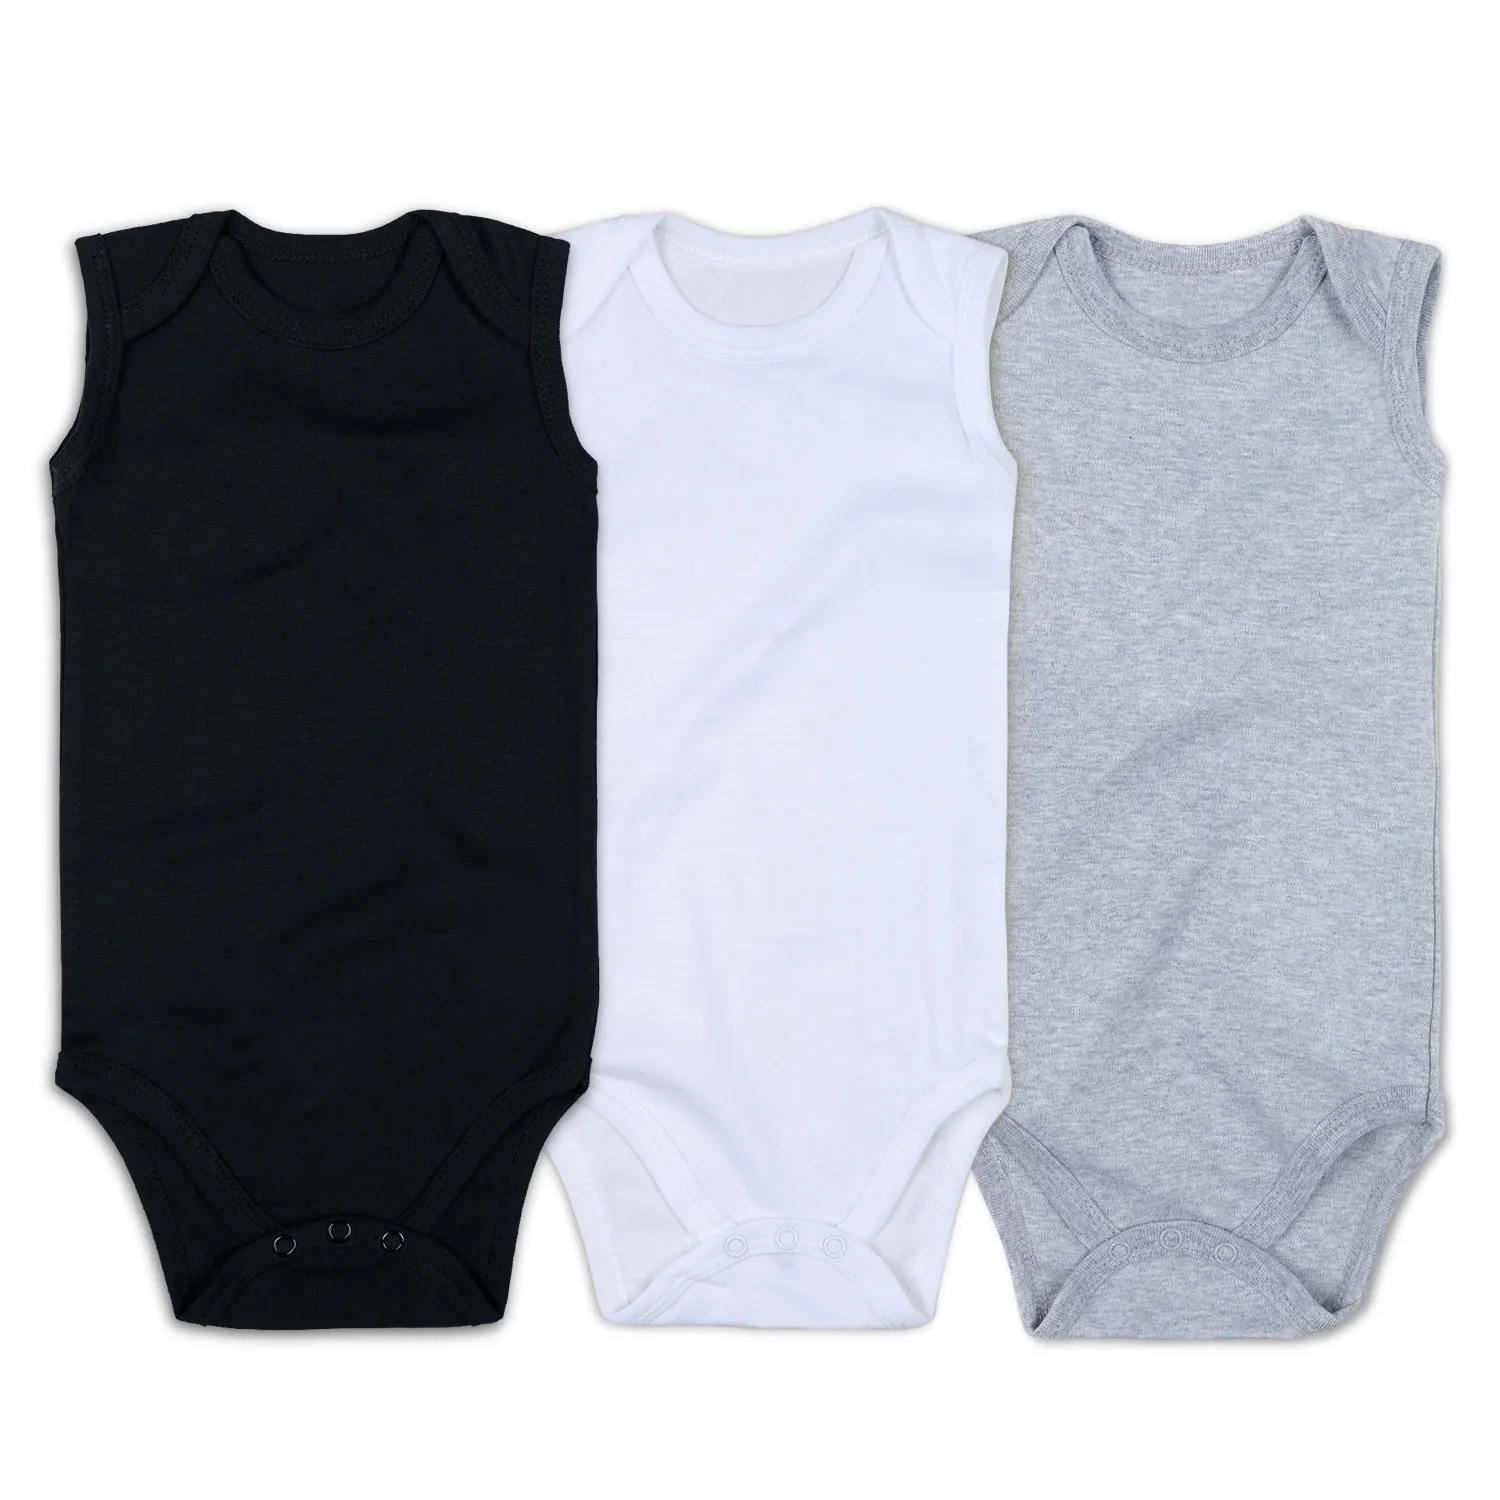 

Wholesale Summer 3Pcs Solid Color Plain Baby Clothes Sleeveless Baby Romper Newborn 100%Cotton Baby Clothing Bodysuit Organic, Mix color